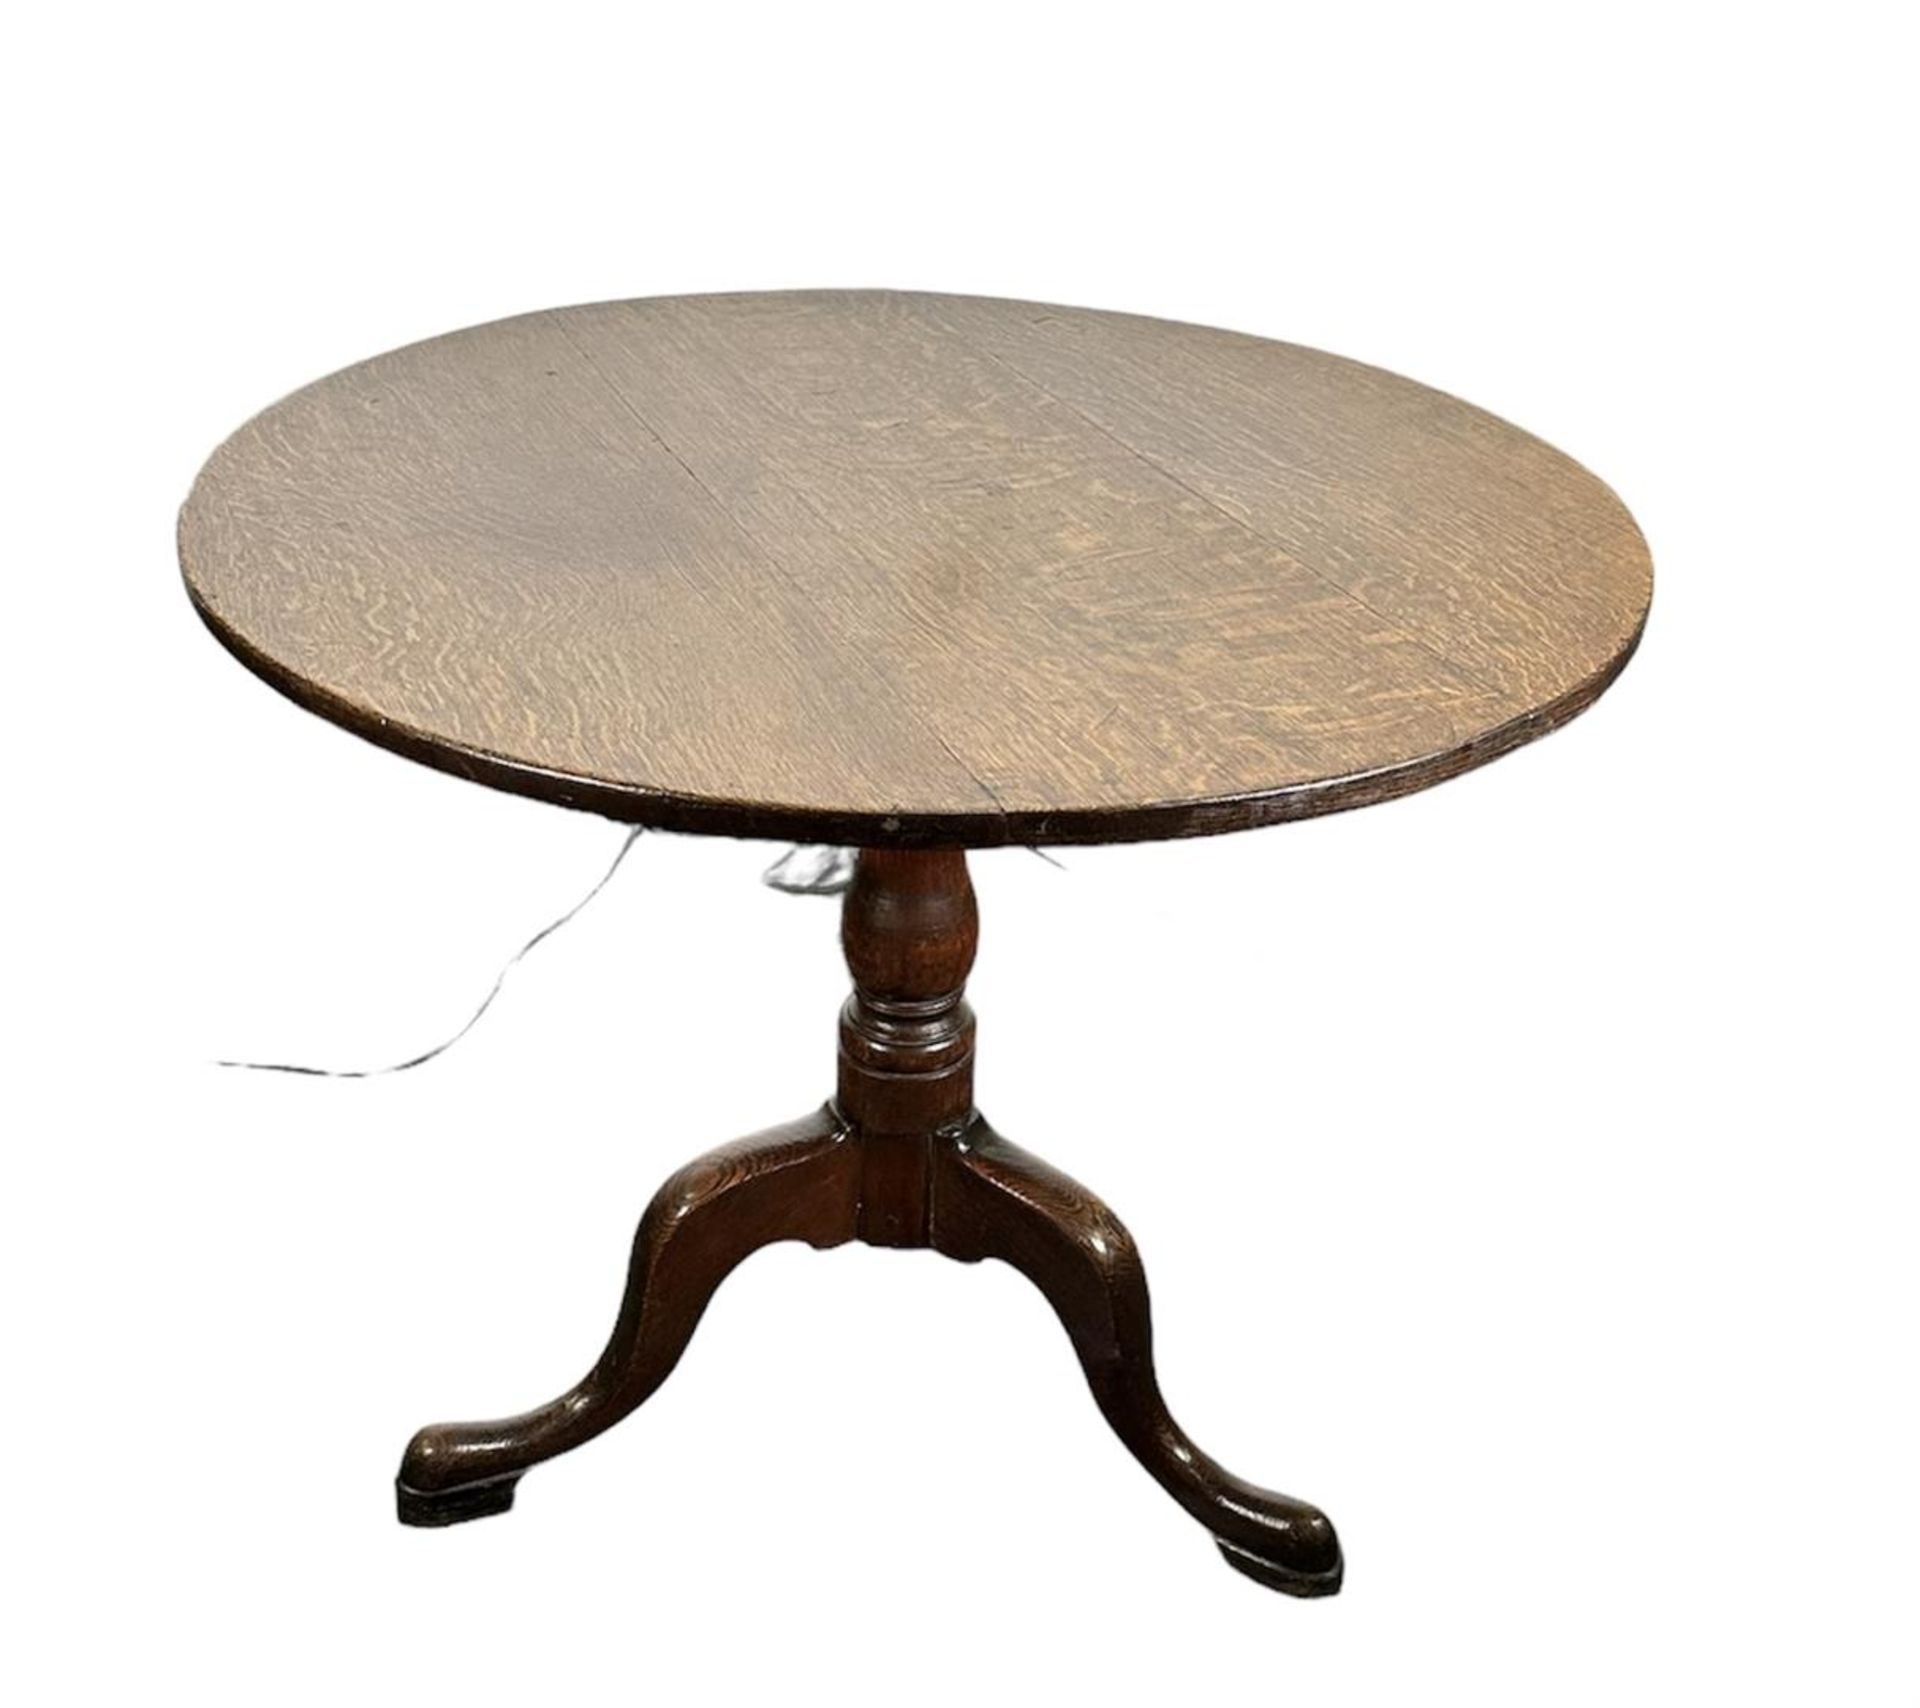 An oak 'occasional' table with a round top on three legs. England, first half of the 19th century.